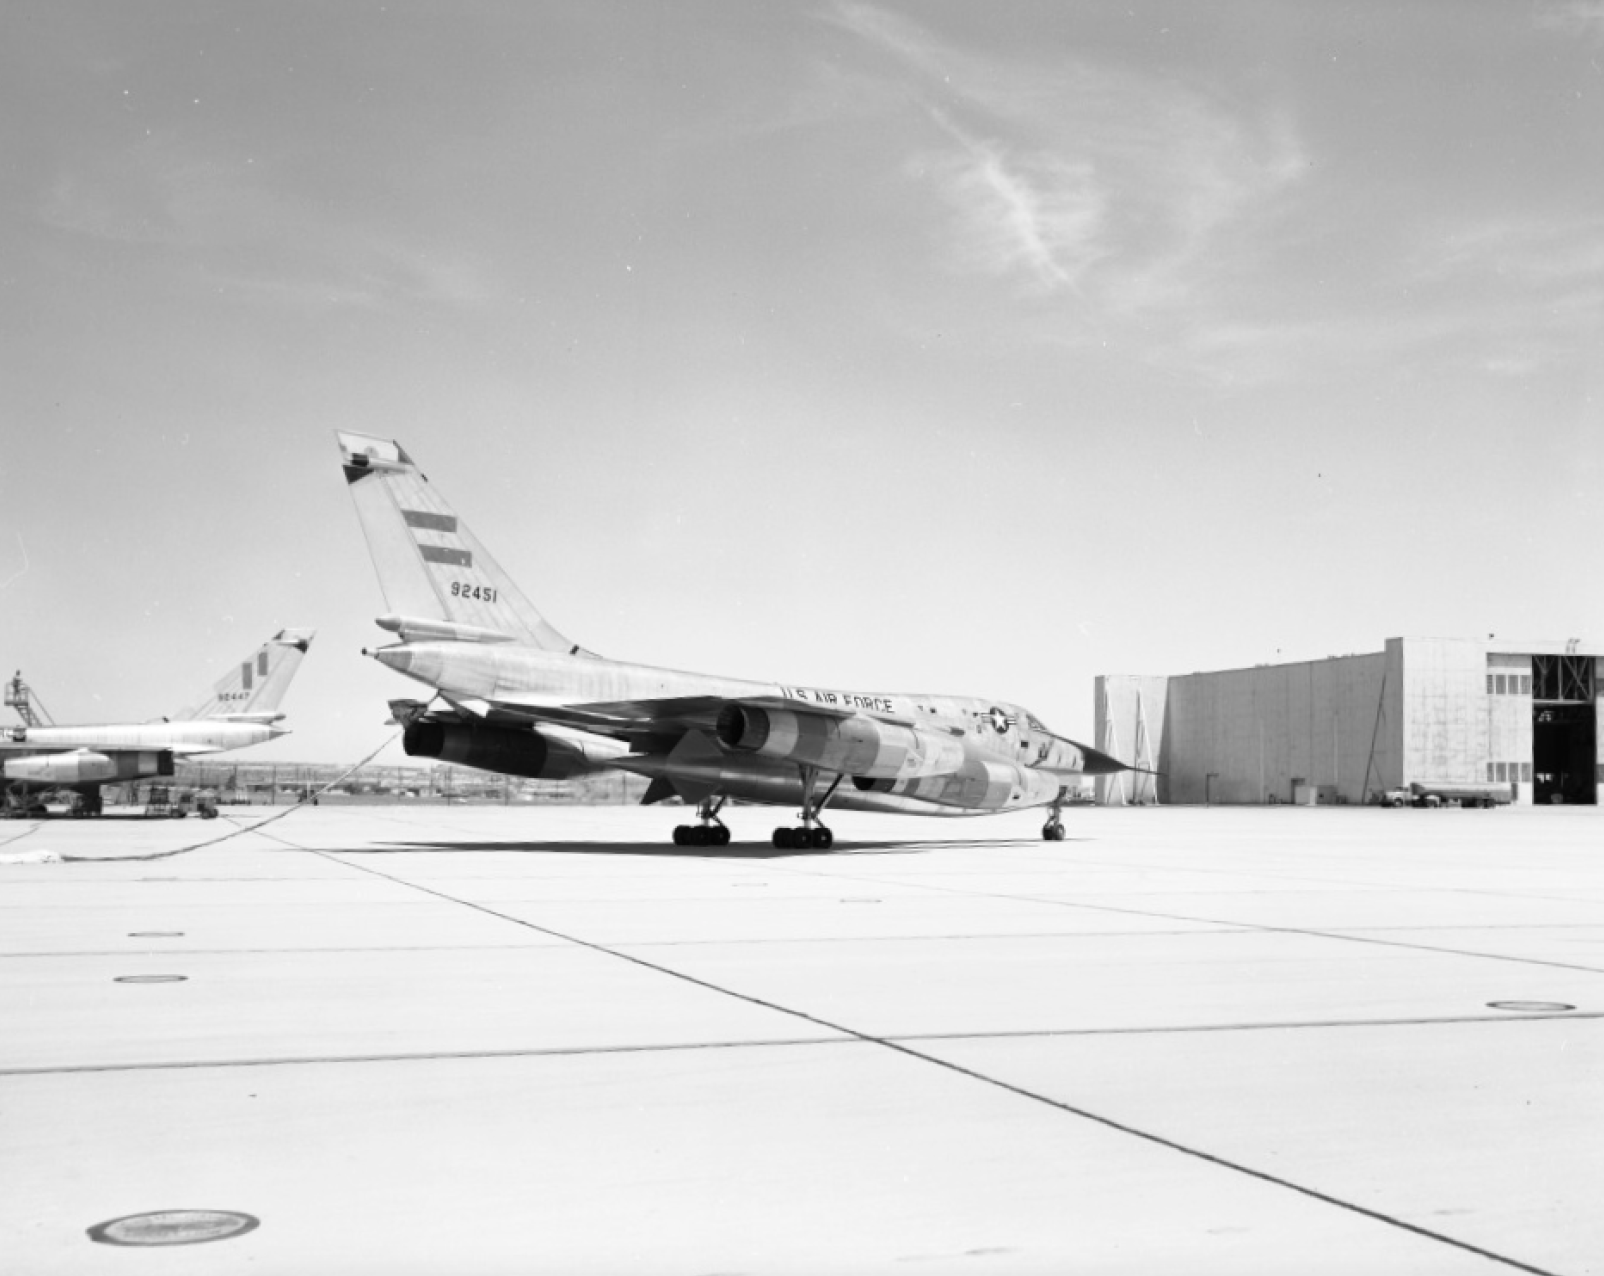 Convair B-58A-10-CF Hustler 59-2451 taxis back to teh ramp at Edwards Air Force Base, following teh Bleriot Trophy speed run, 10 May 1961. (General Dynamics/San Diego Air and Space Museum Archives Catolog number 01 00093633)